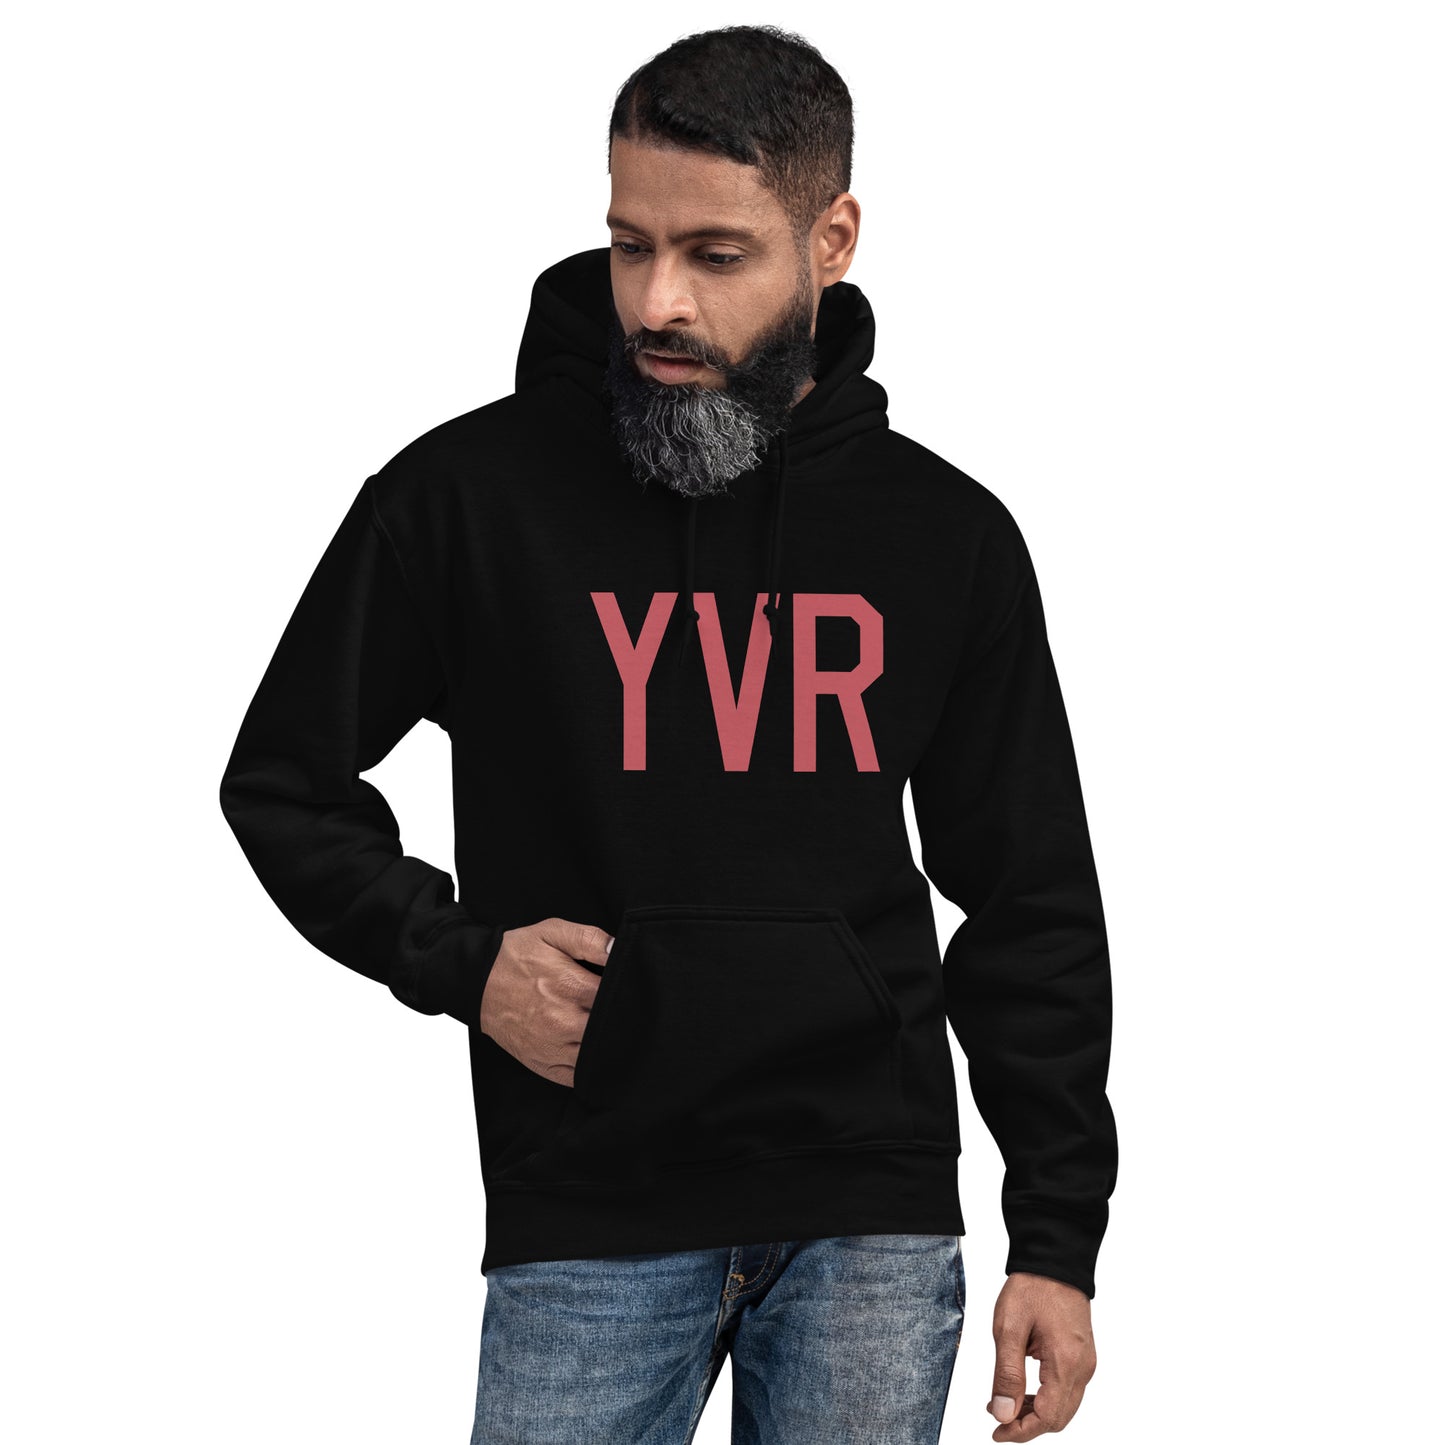 Aviation Enthusiast Hoodie - Deep Pink Graphic • YVR Vancouver • YHM Designs - Image 05